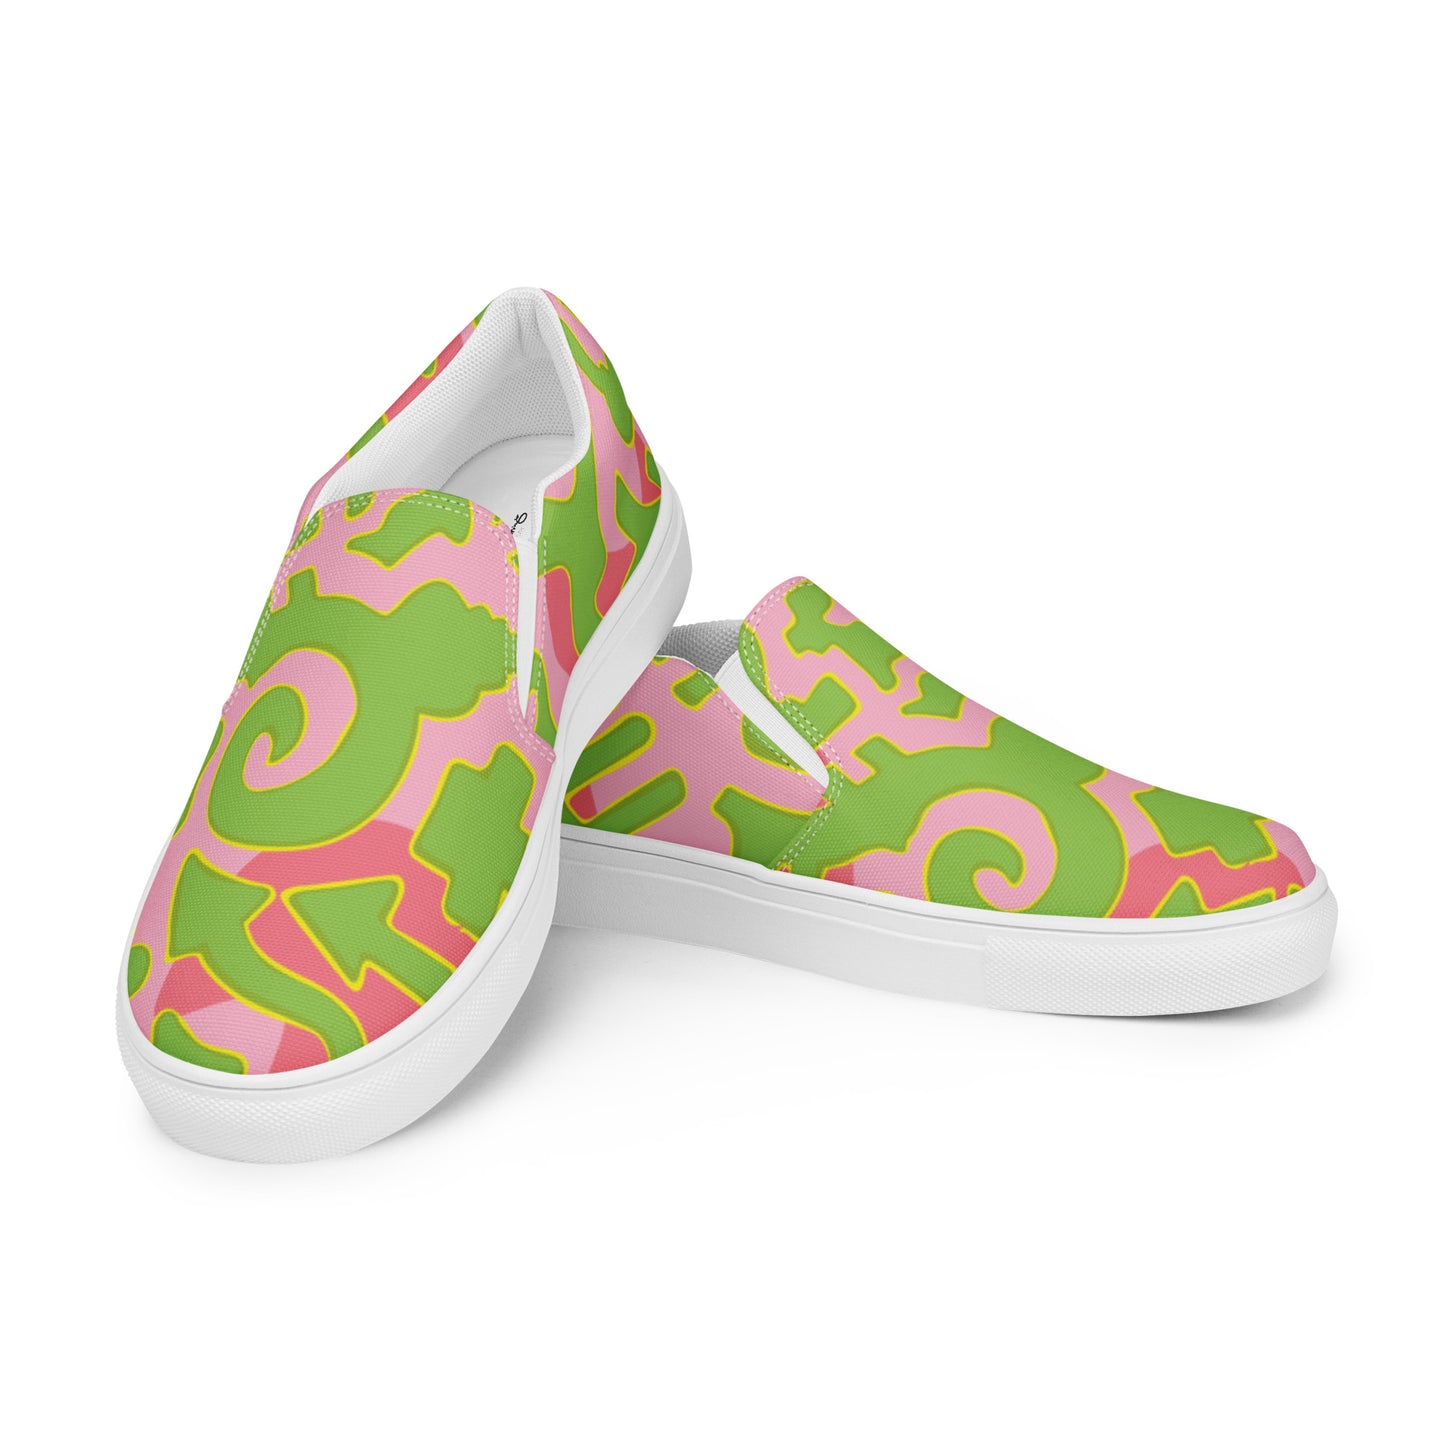 PINK FISHES by DOLVING - Men’s slip-on canvas shoes